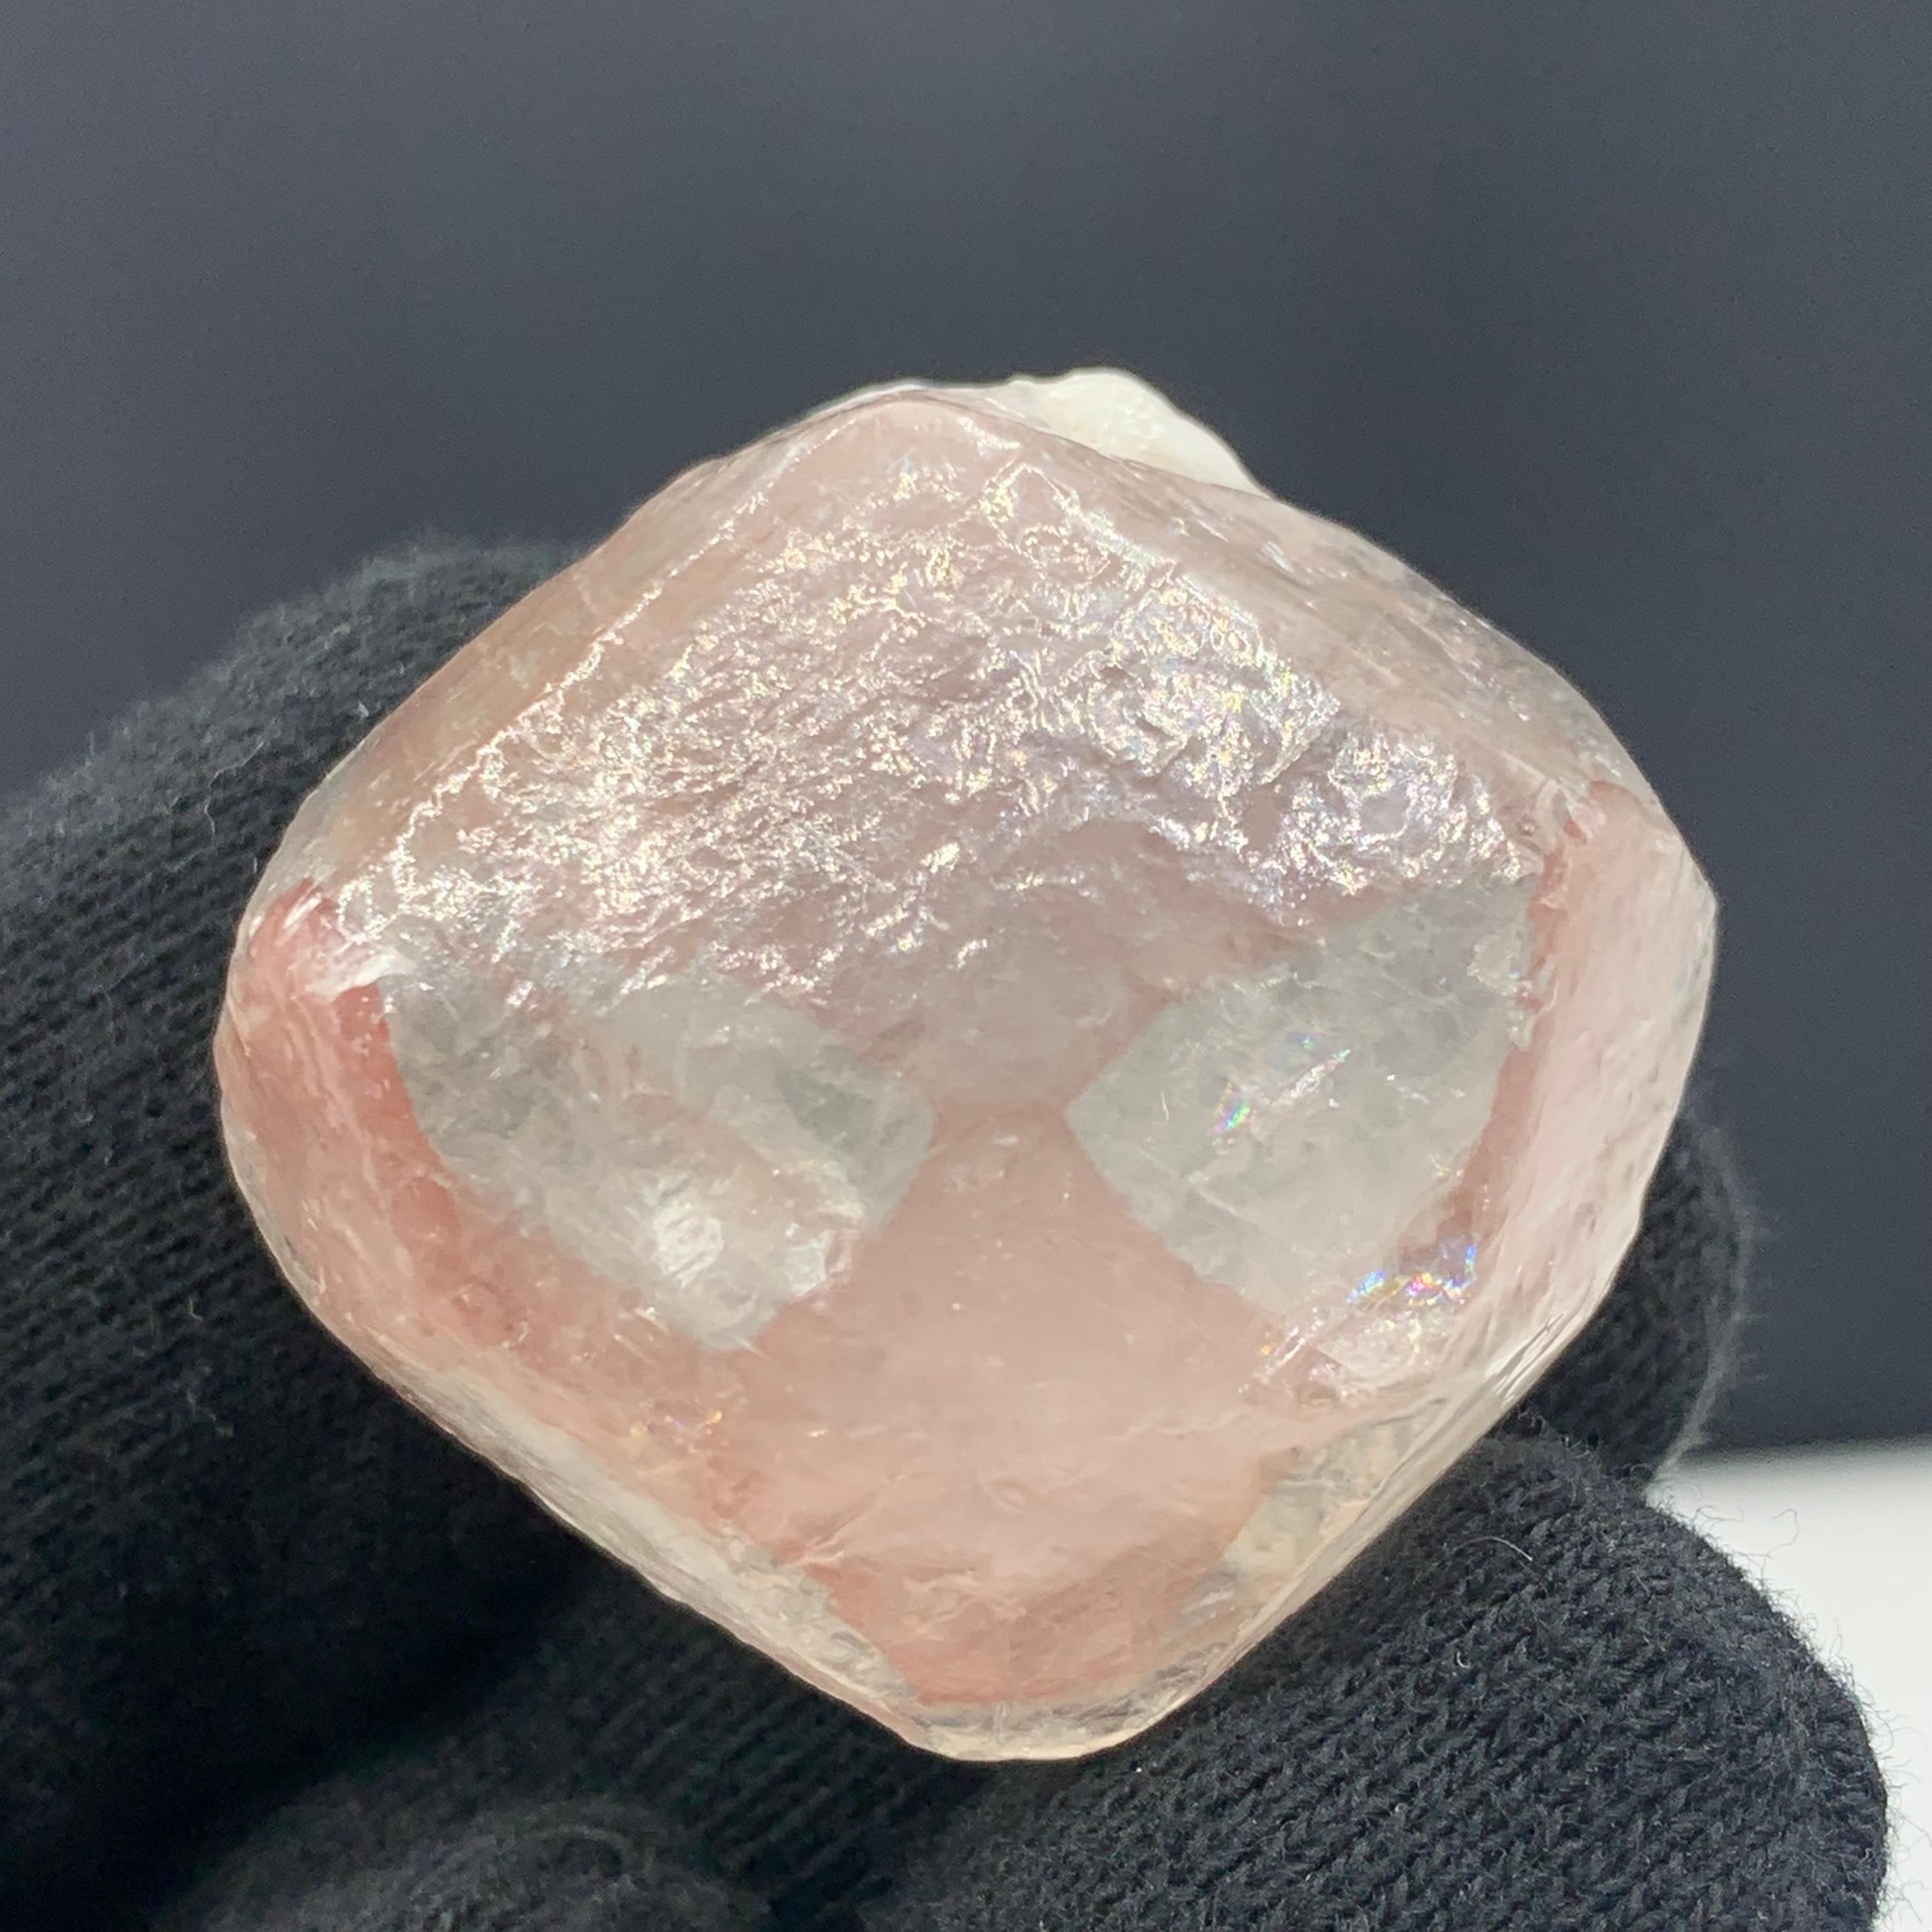 34.04 Gram Adorable Spider Eye Calcite crystal  From Balochistan, Pakistan 
Weight: 34.04 Gram 
Dimension: 3 x 3 x 2 Cm
Origin: Balochistan, Pakistan 

Calcite cleanses and improves the functions of the kidneys, pancreas, and spleen. It dissolves